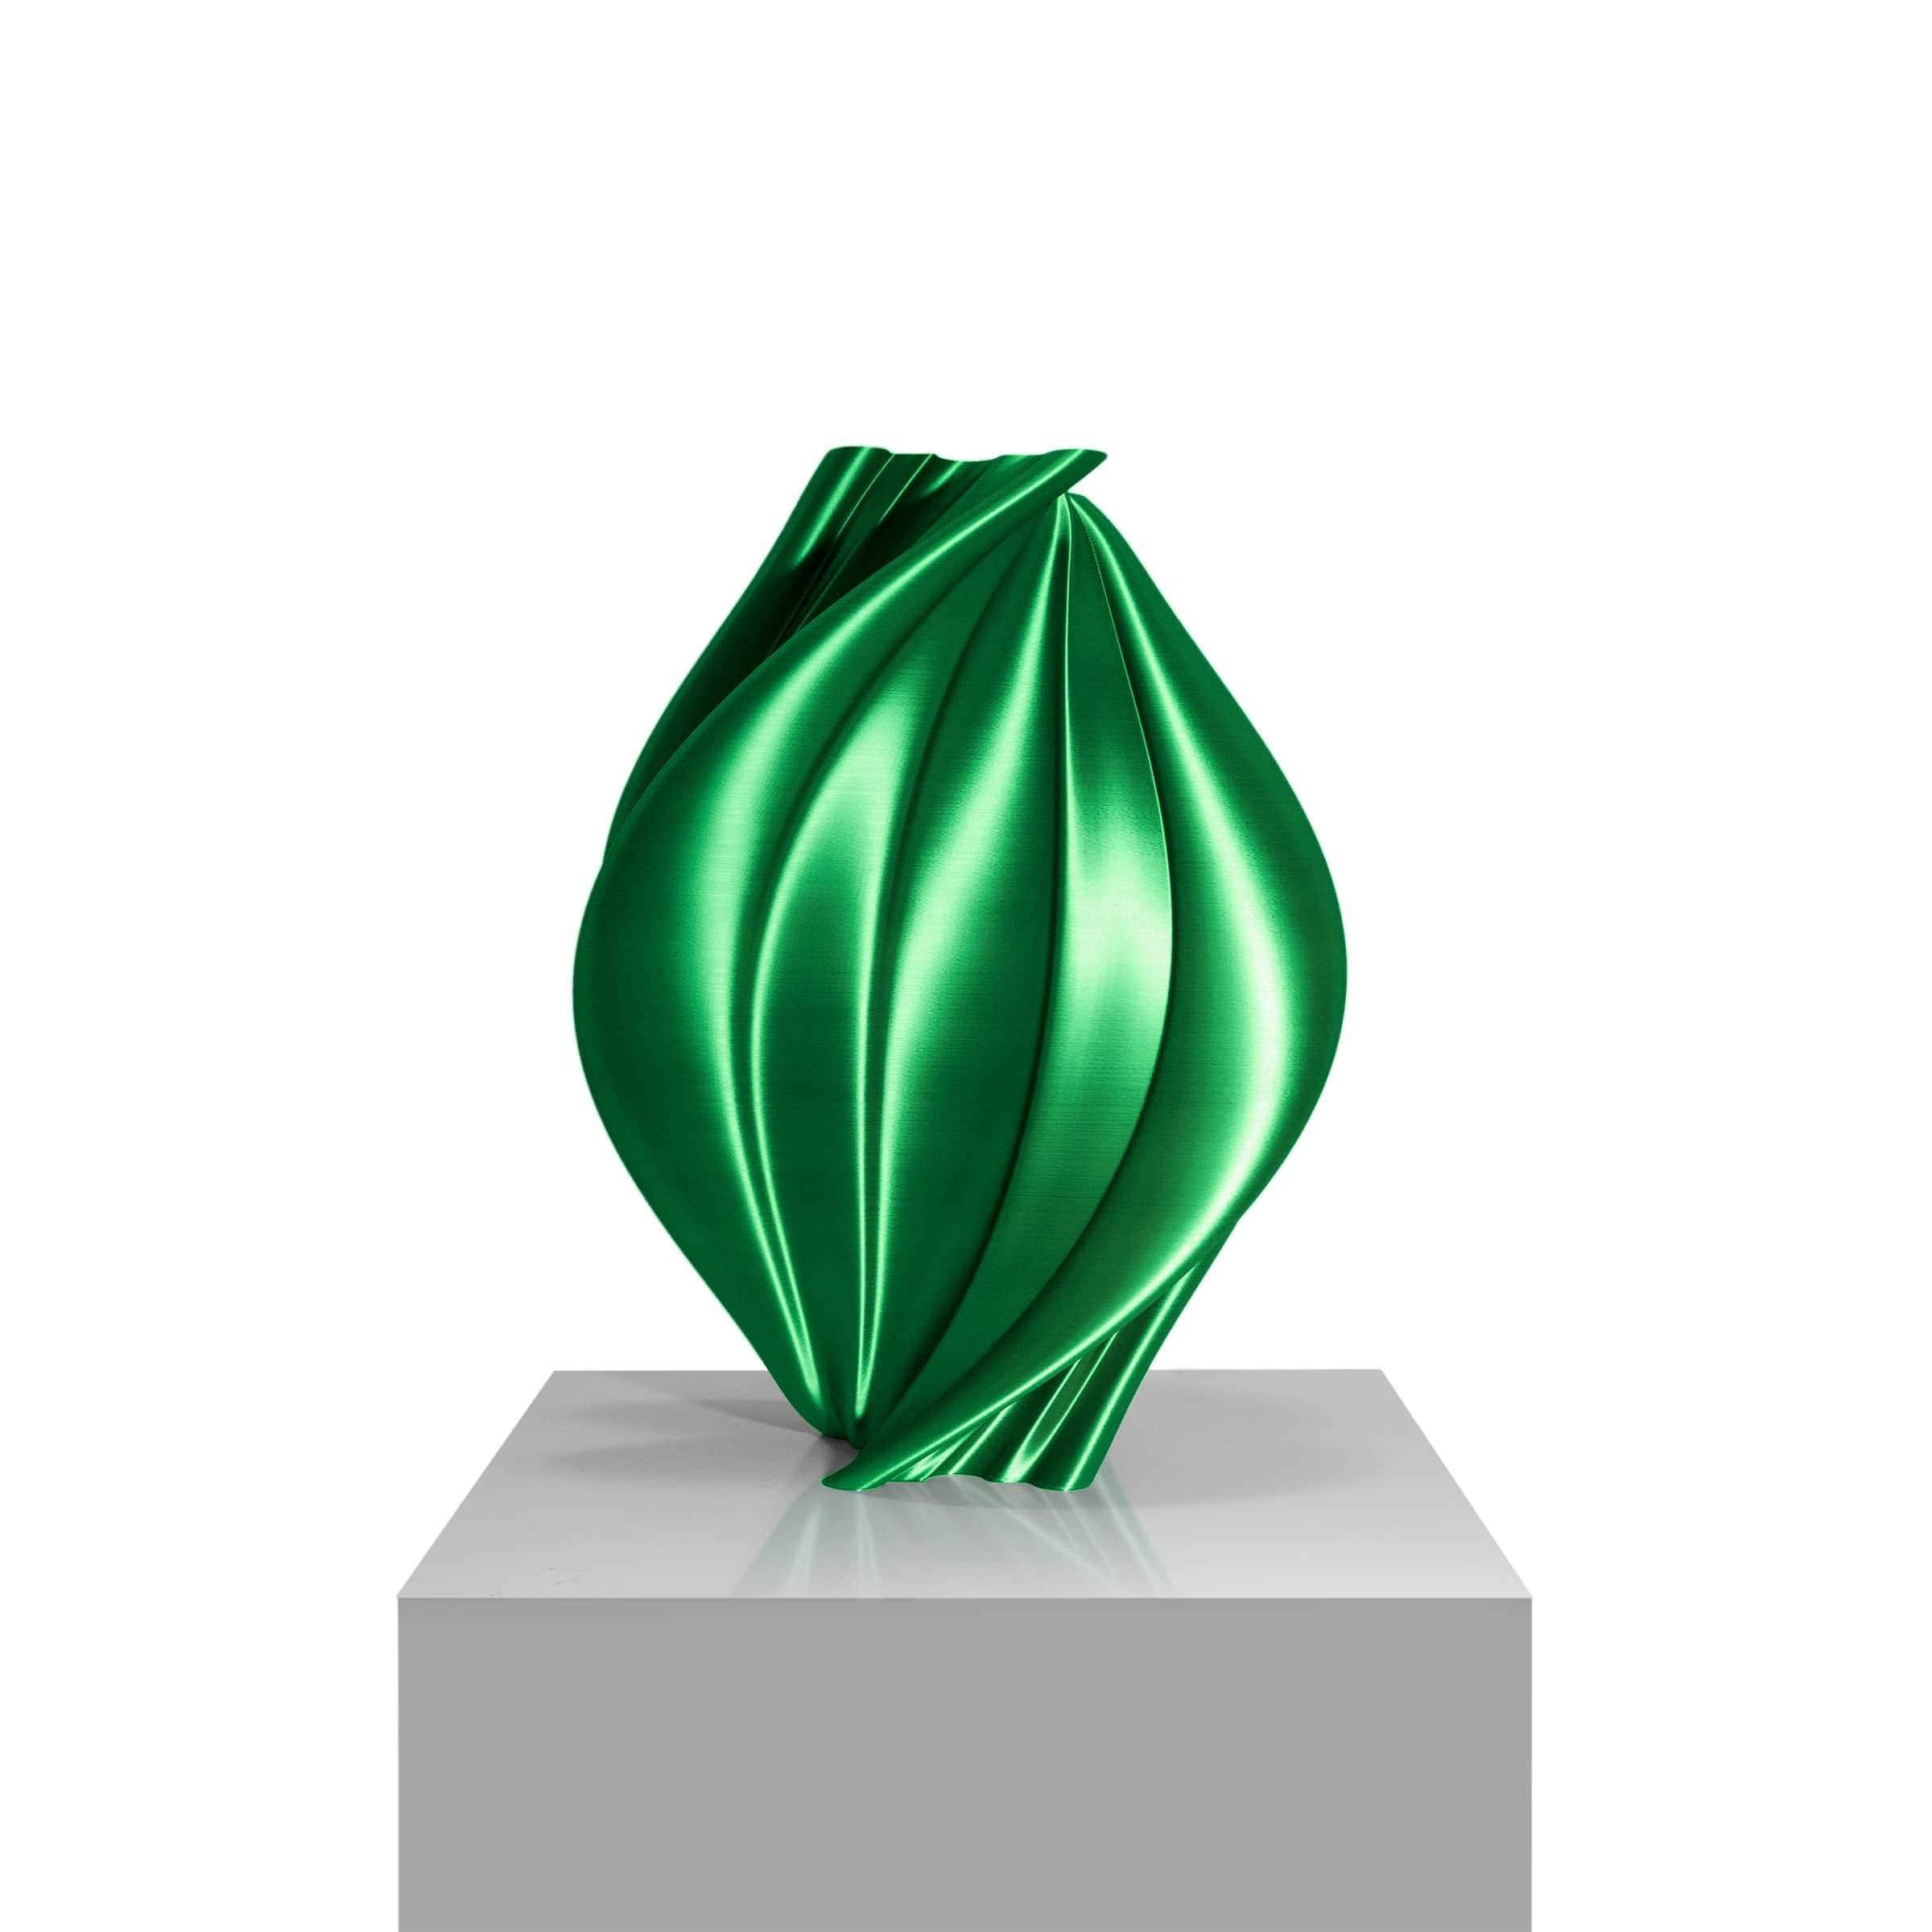 Vase-sculpture by DygoDesign

A majestic and harmonious design of unprecedented charm, this precious sculpture is defined by sinuous lines twirling into a soft and soothing 